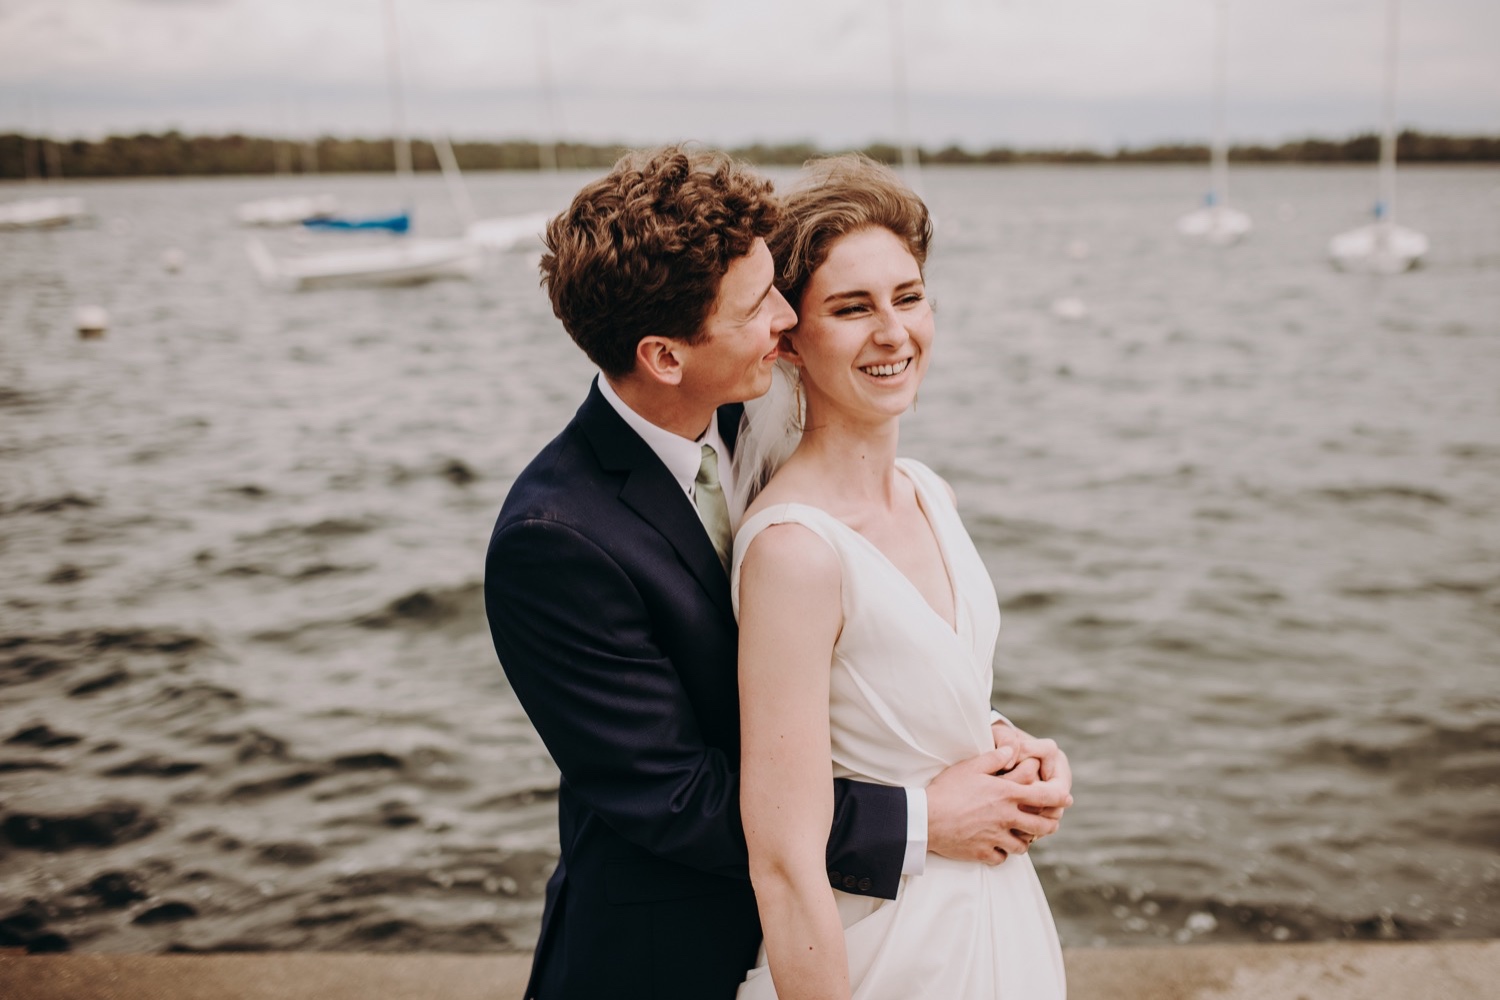 Bride and groom portraits at Lake harriet in minnesota. Minneapolis wedding photography.